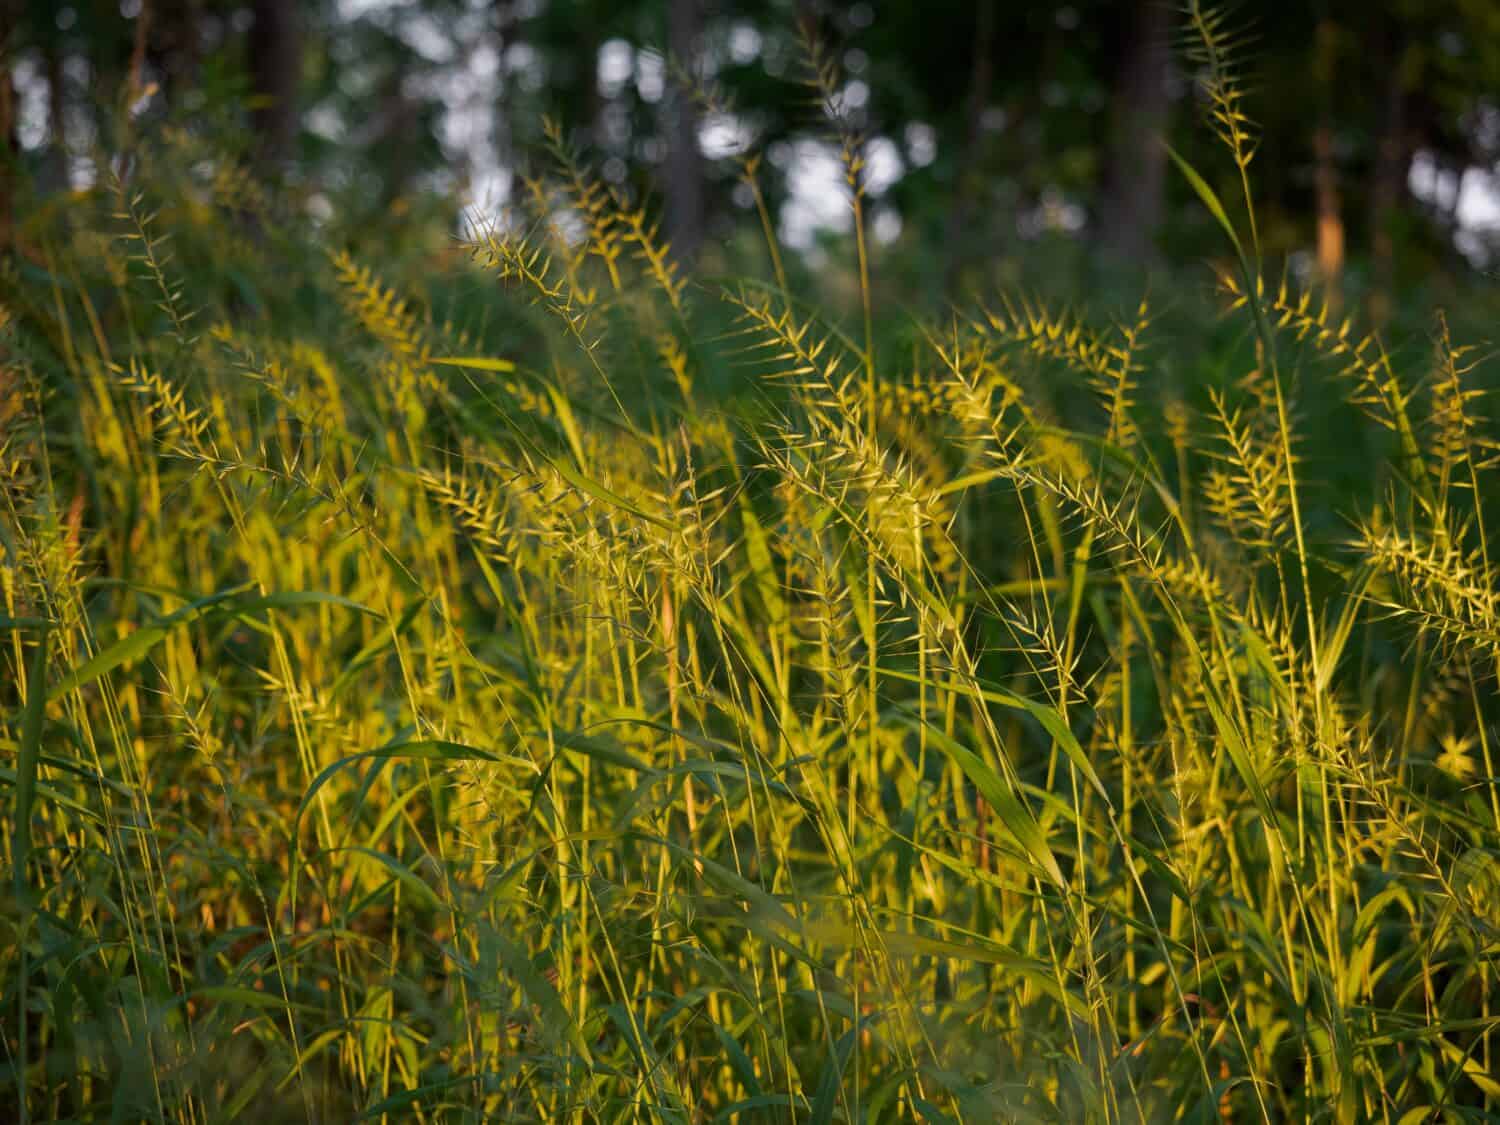 A field of sunlit golden Eastern Bottlebrush Grass or Elymus hystrix photographed in Minnesota with a shallow depth of field. Bottlebrush is an excellent ornametal grass for Zone 4. 